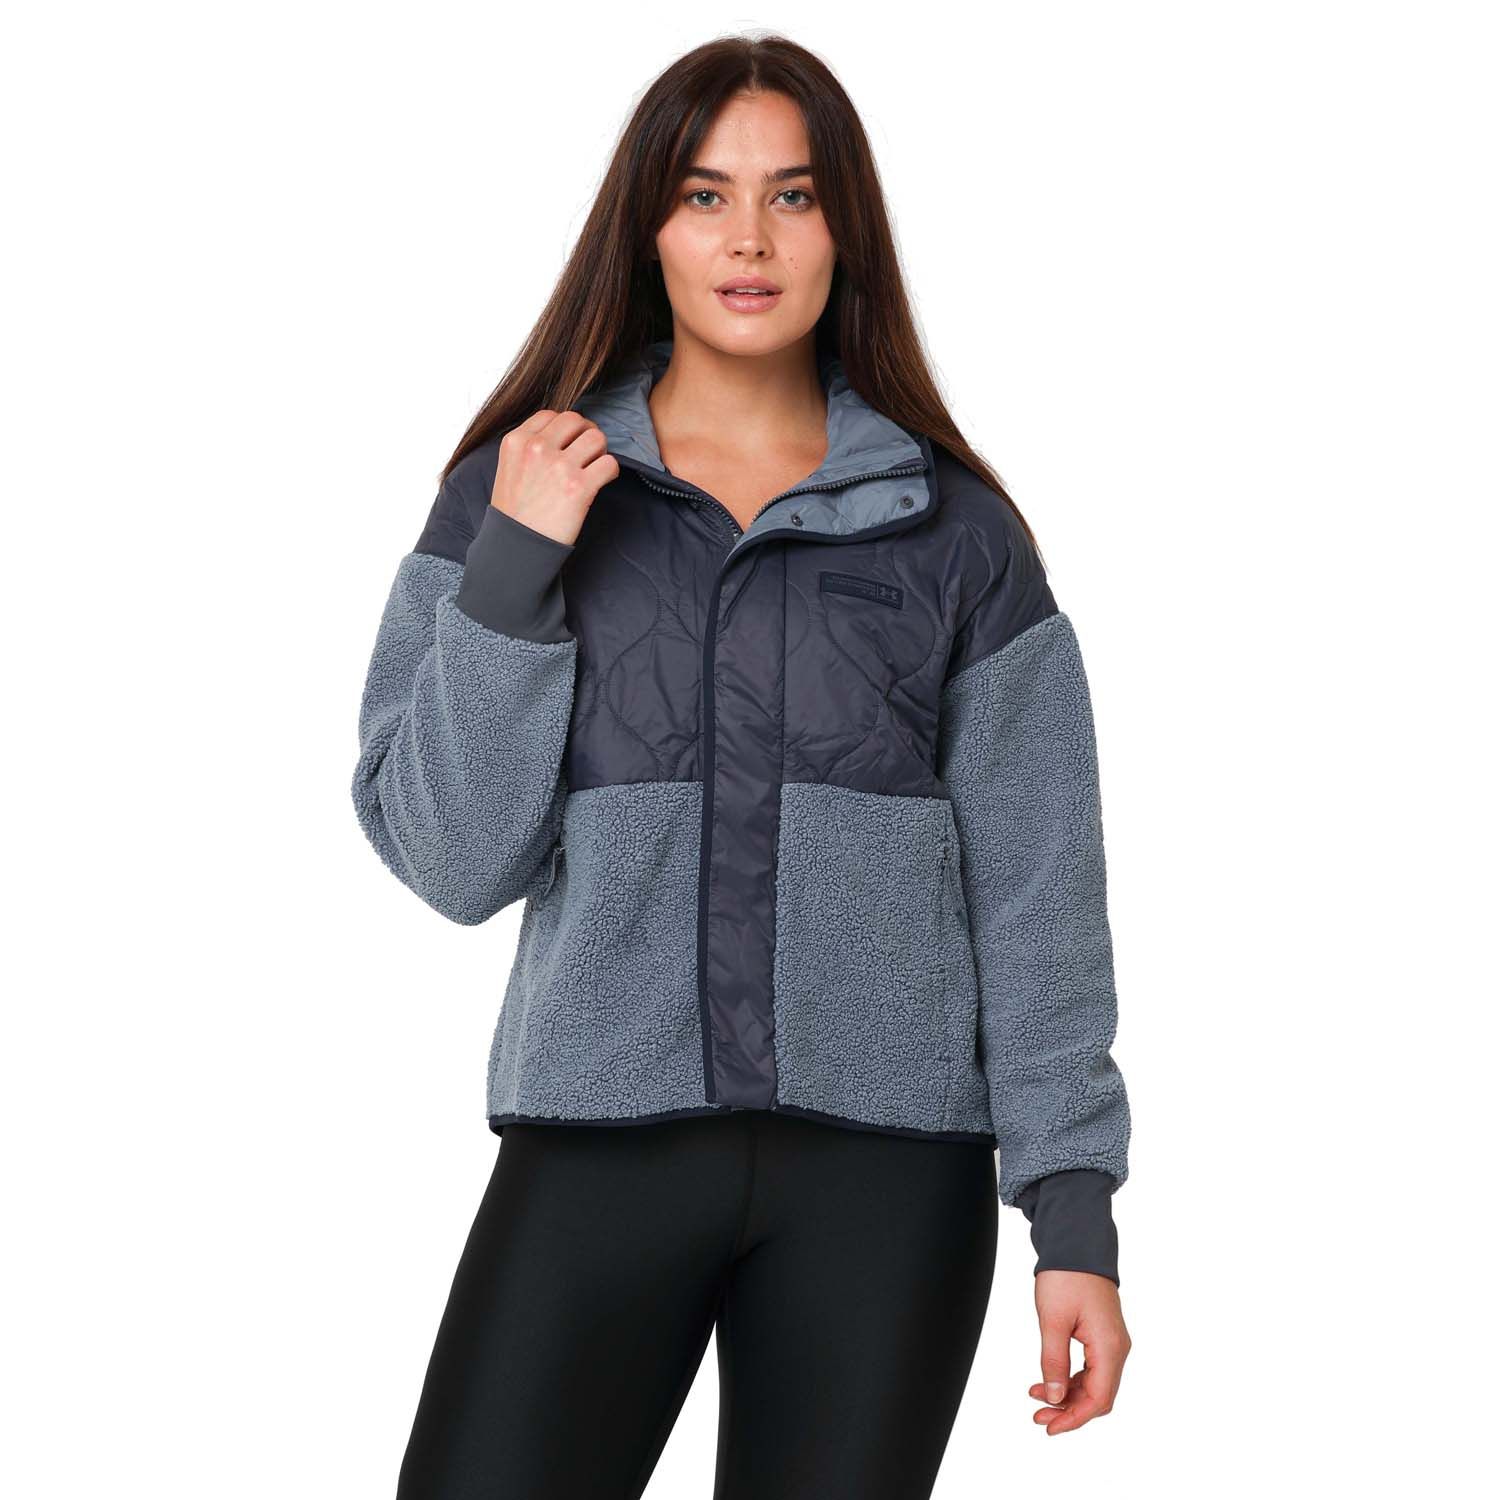 Under Armour Womens UA Mission Insulate Jacket in Grey